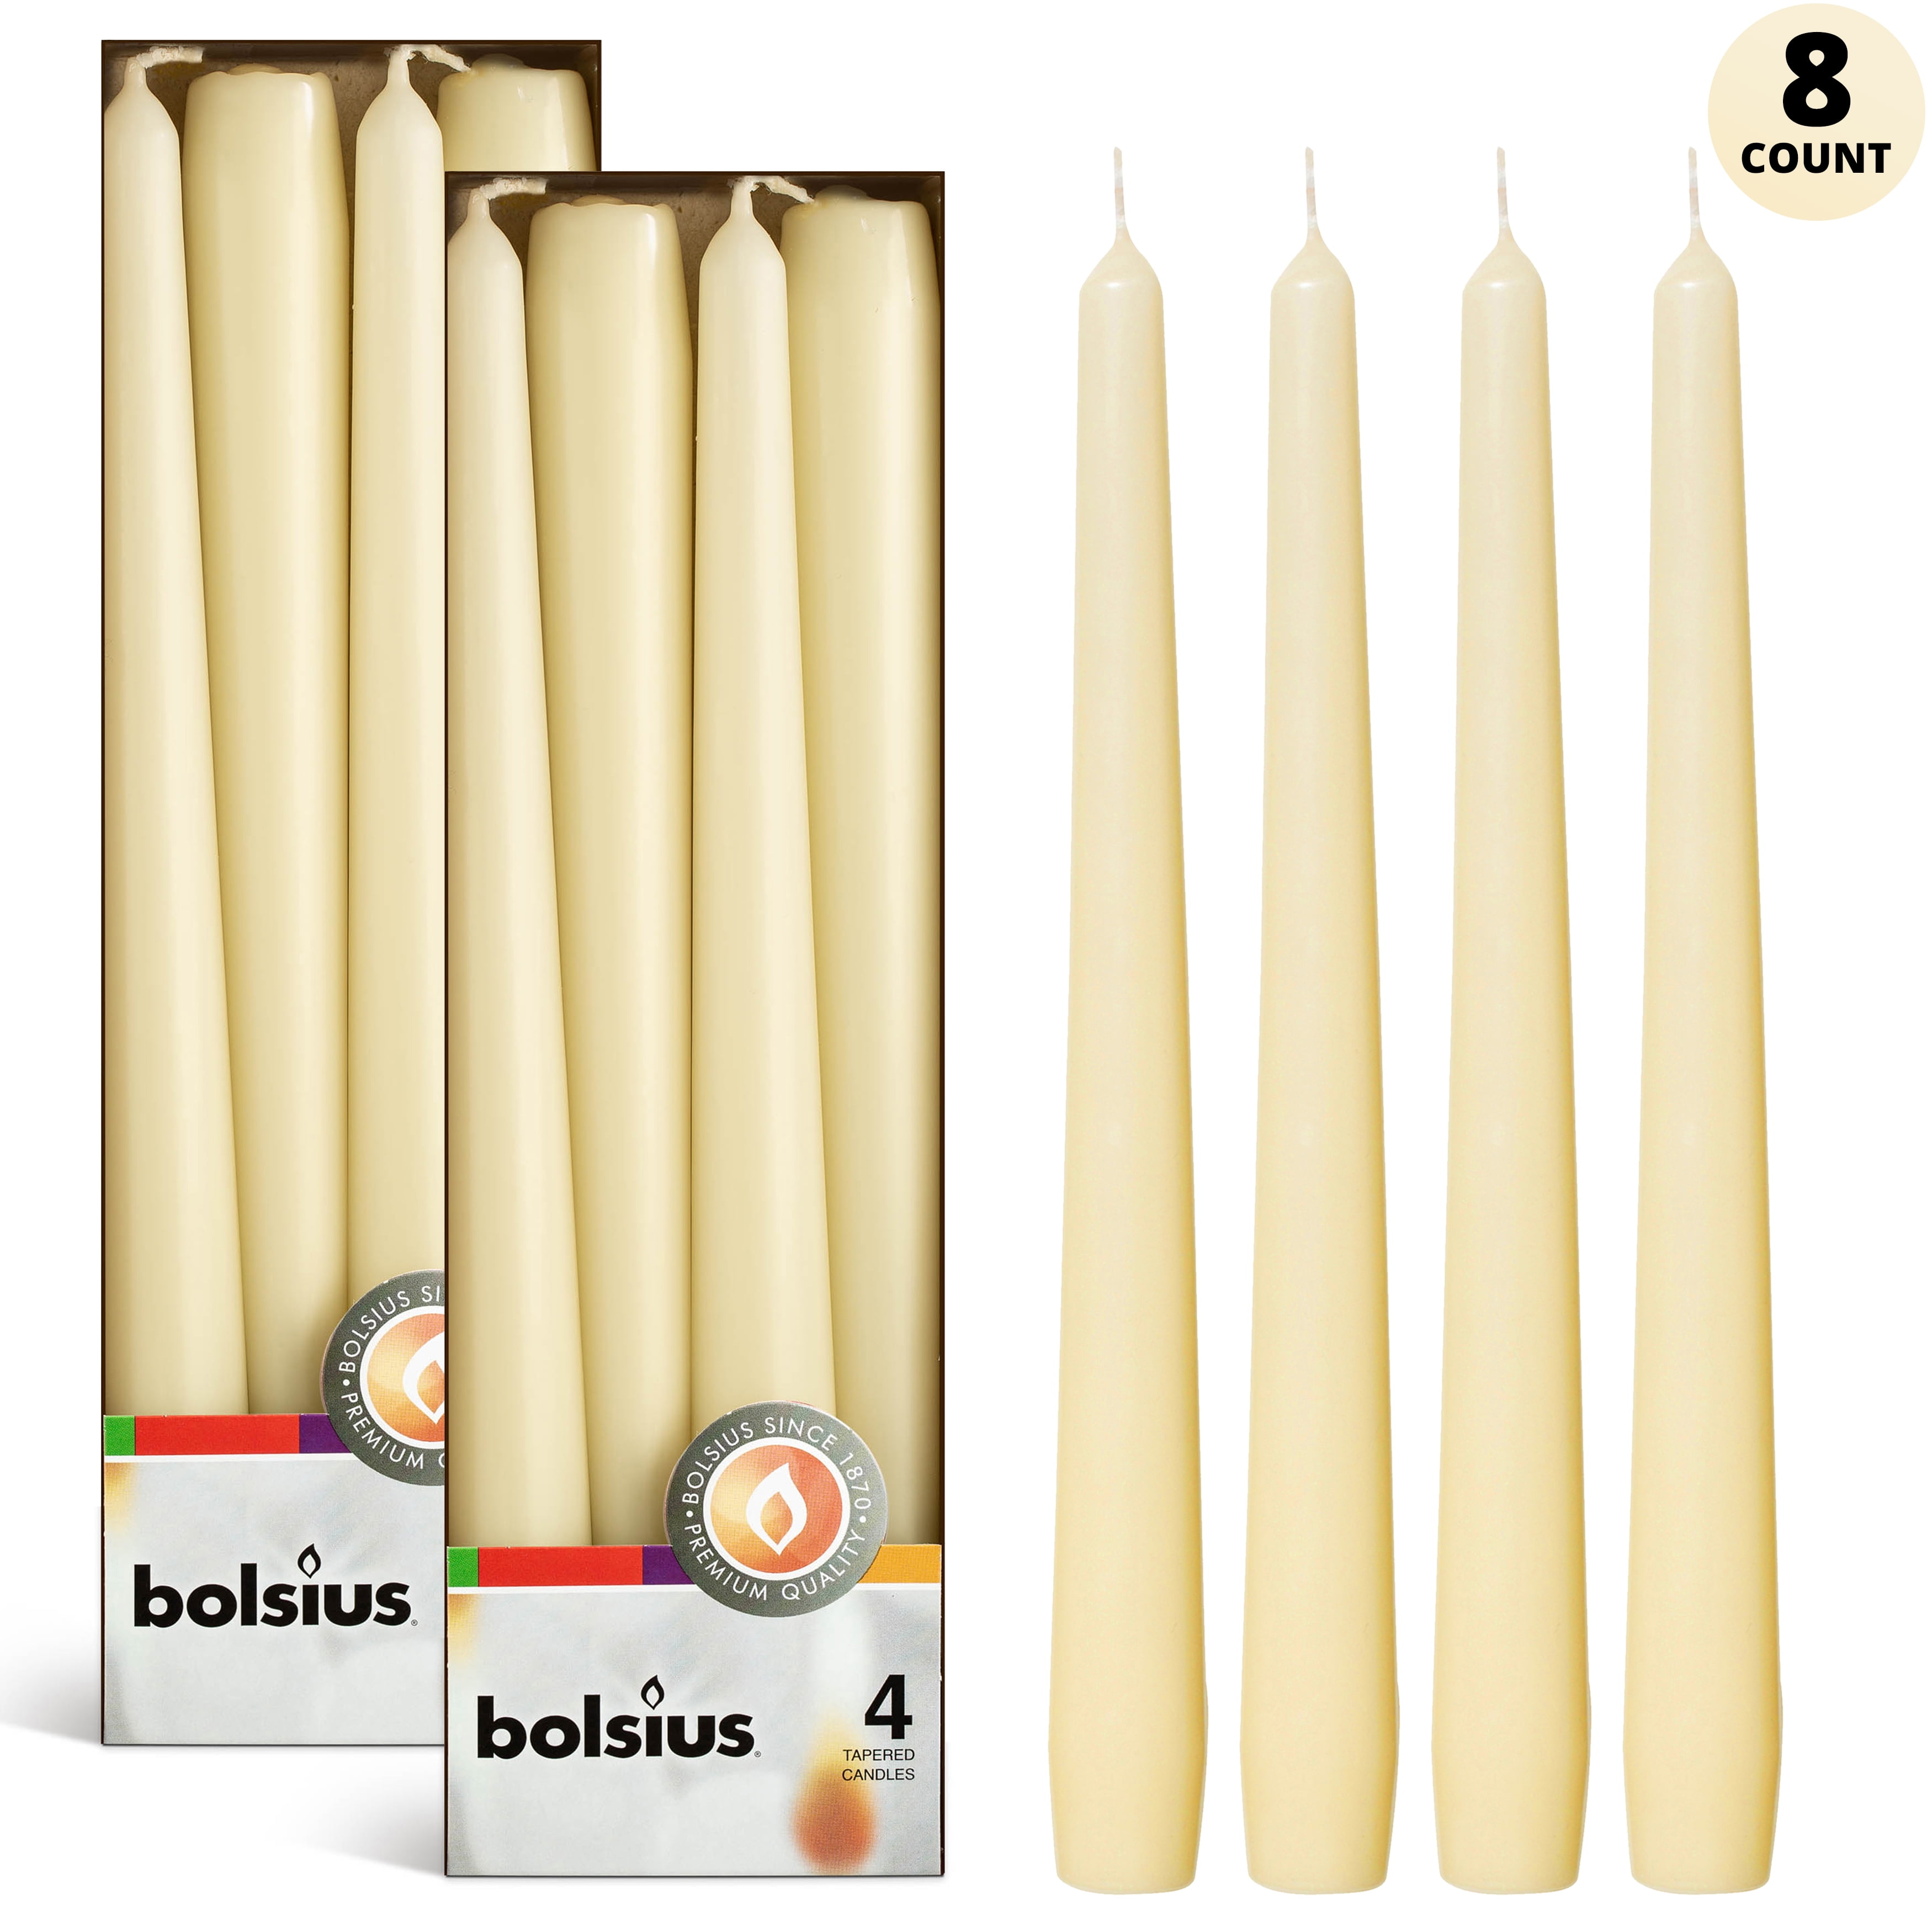 Bolsius Straight Unscented Ivory Candles Pack of 45 - 7-inch Long